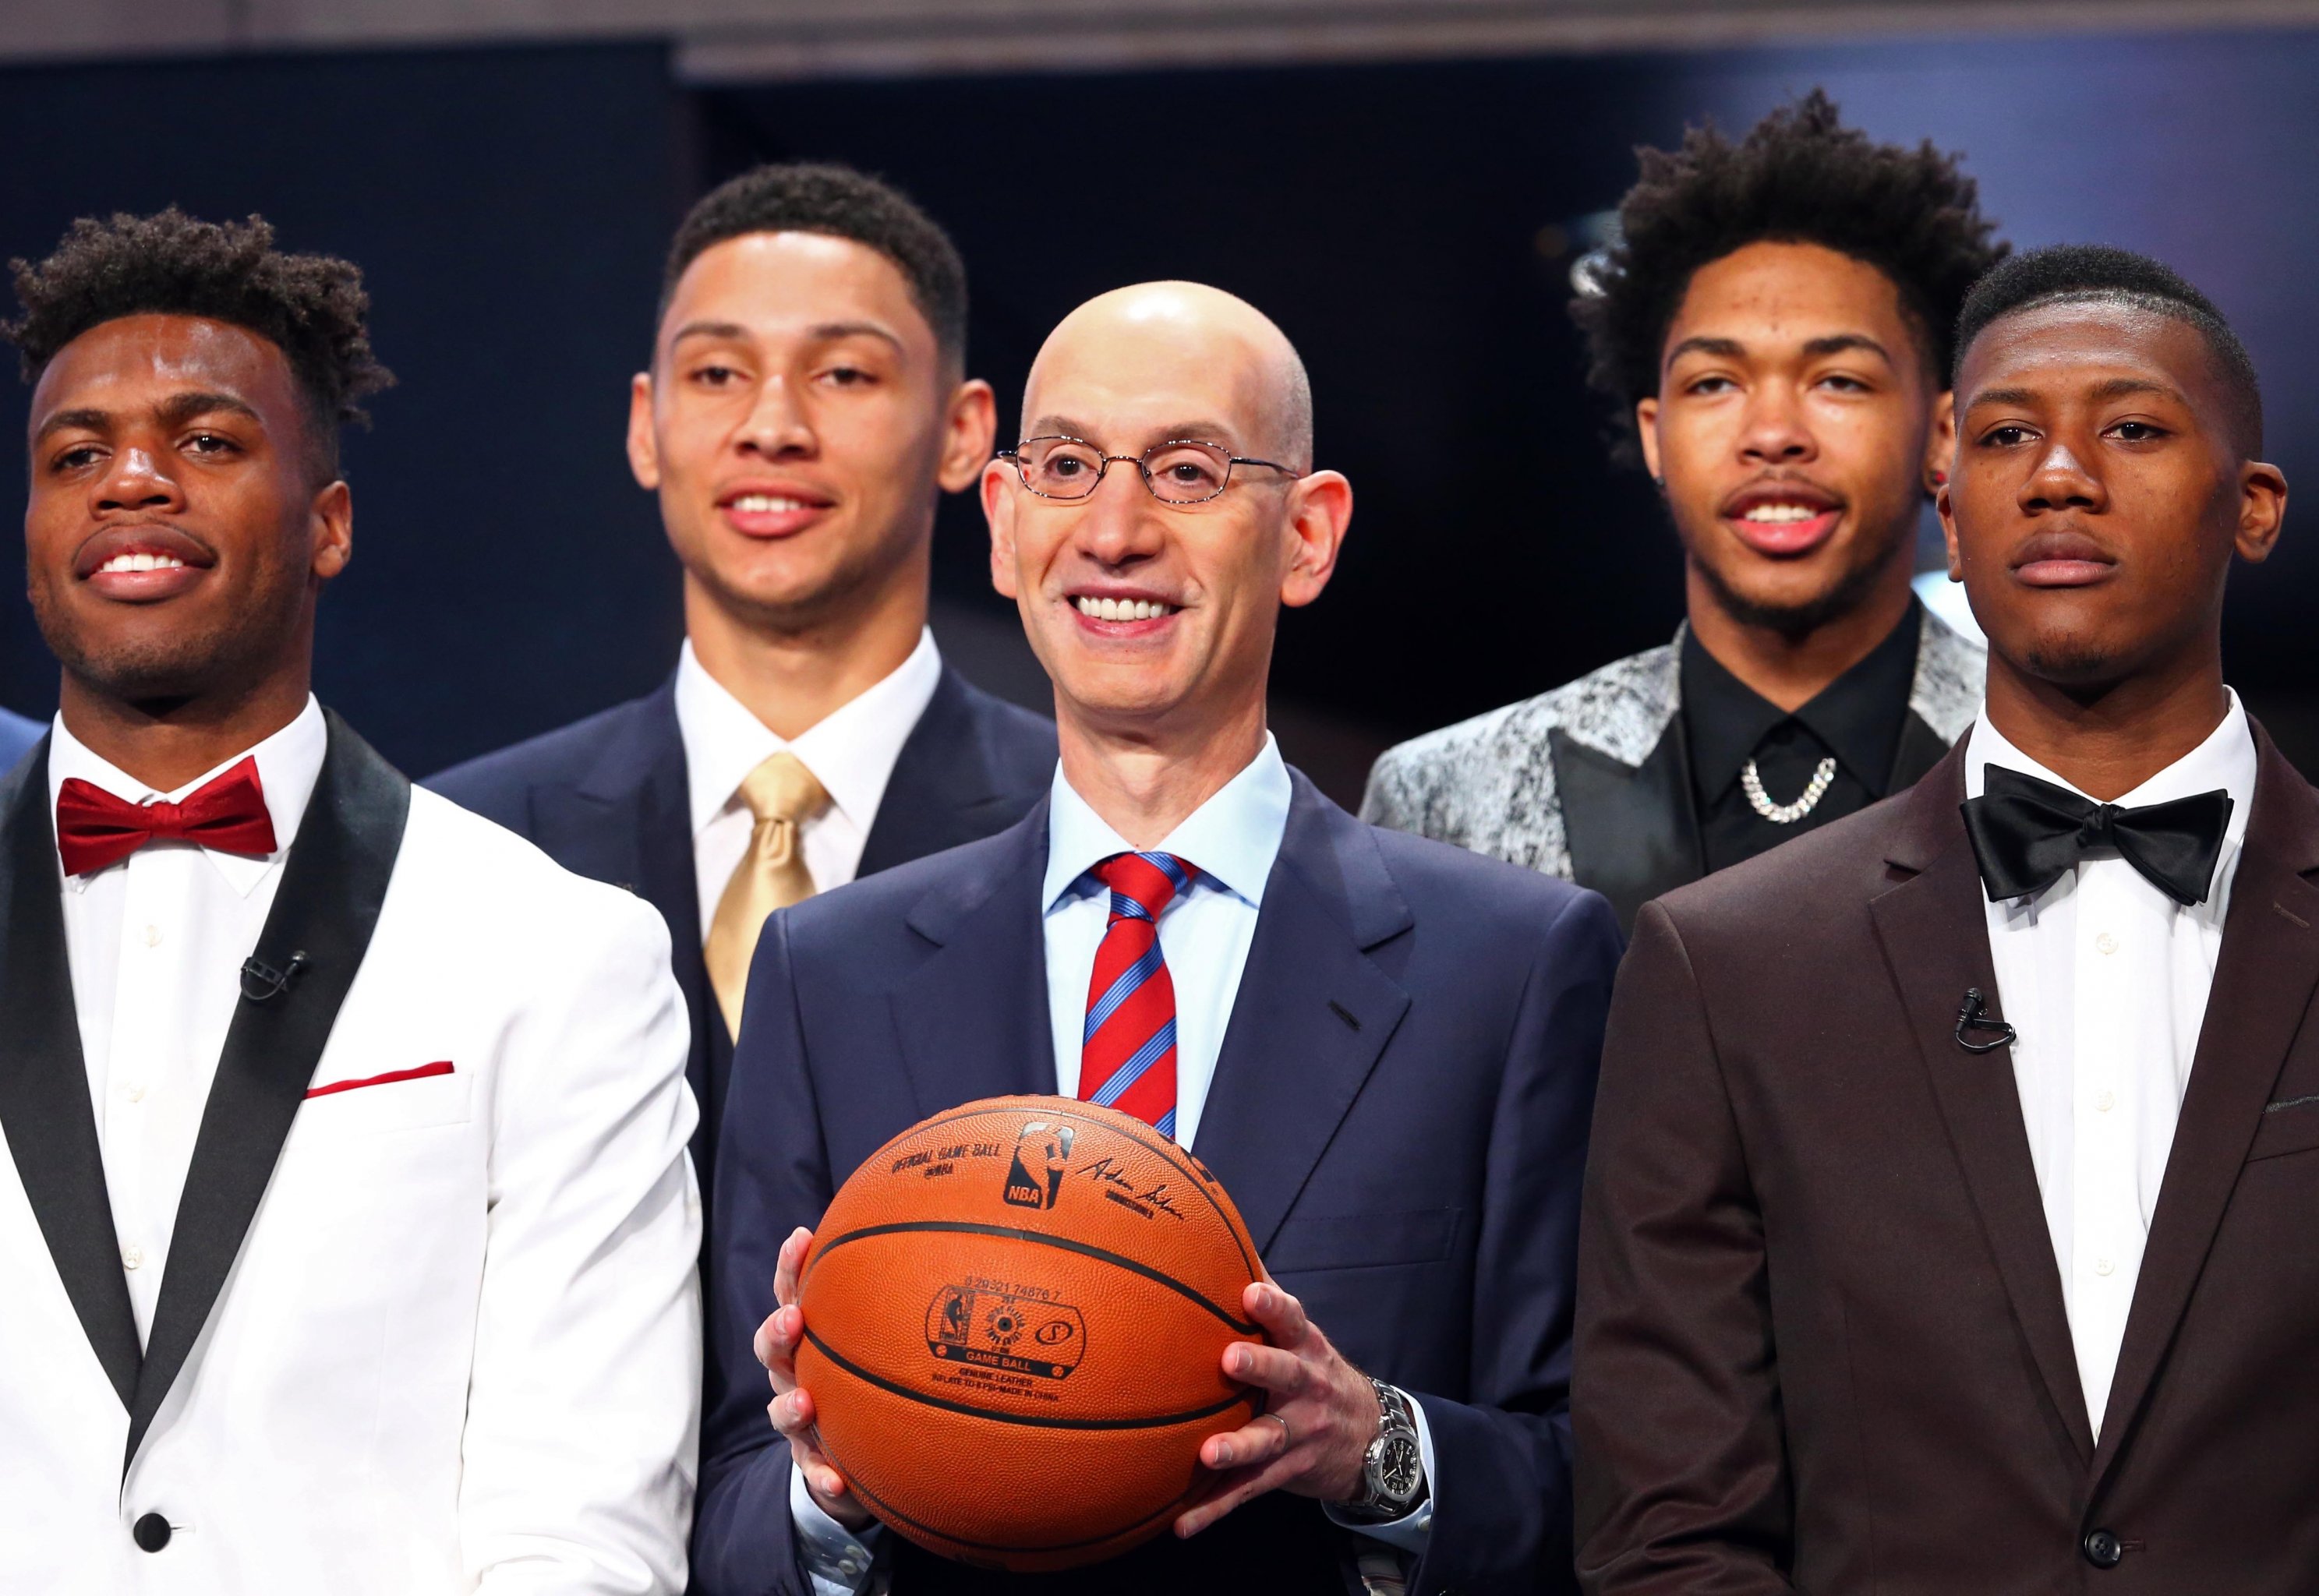 NBA draft suit pics: Best, worst outfits of 2018 - Sports Illustrated